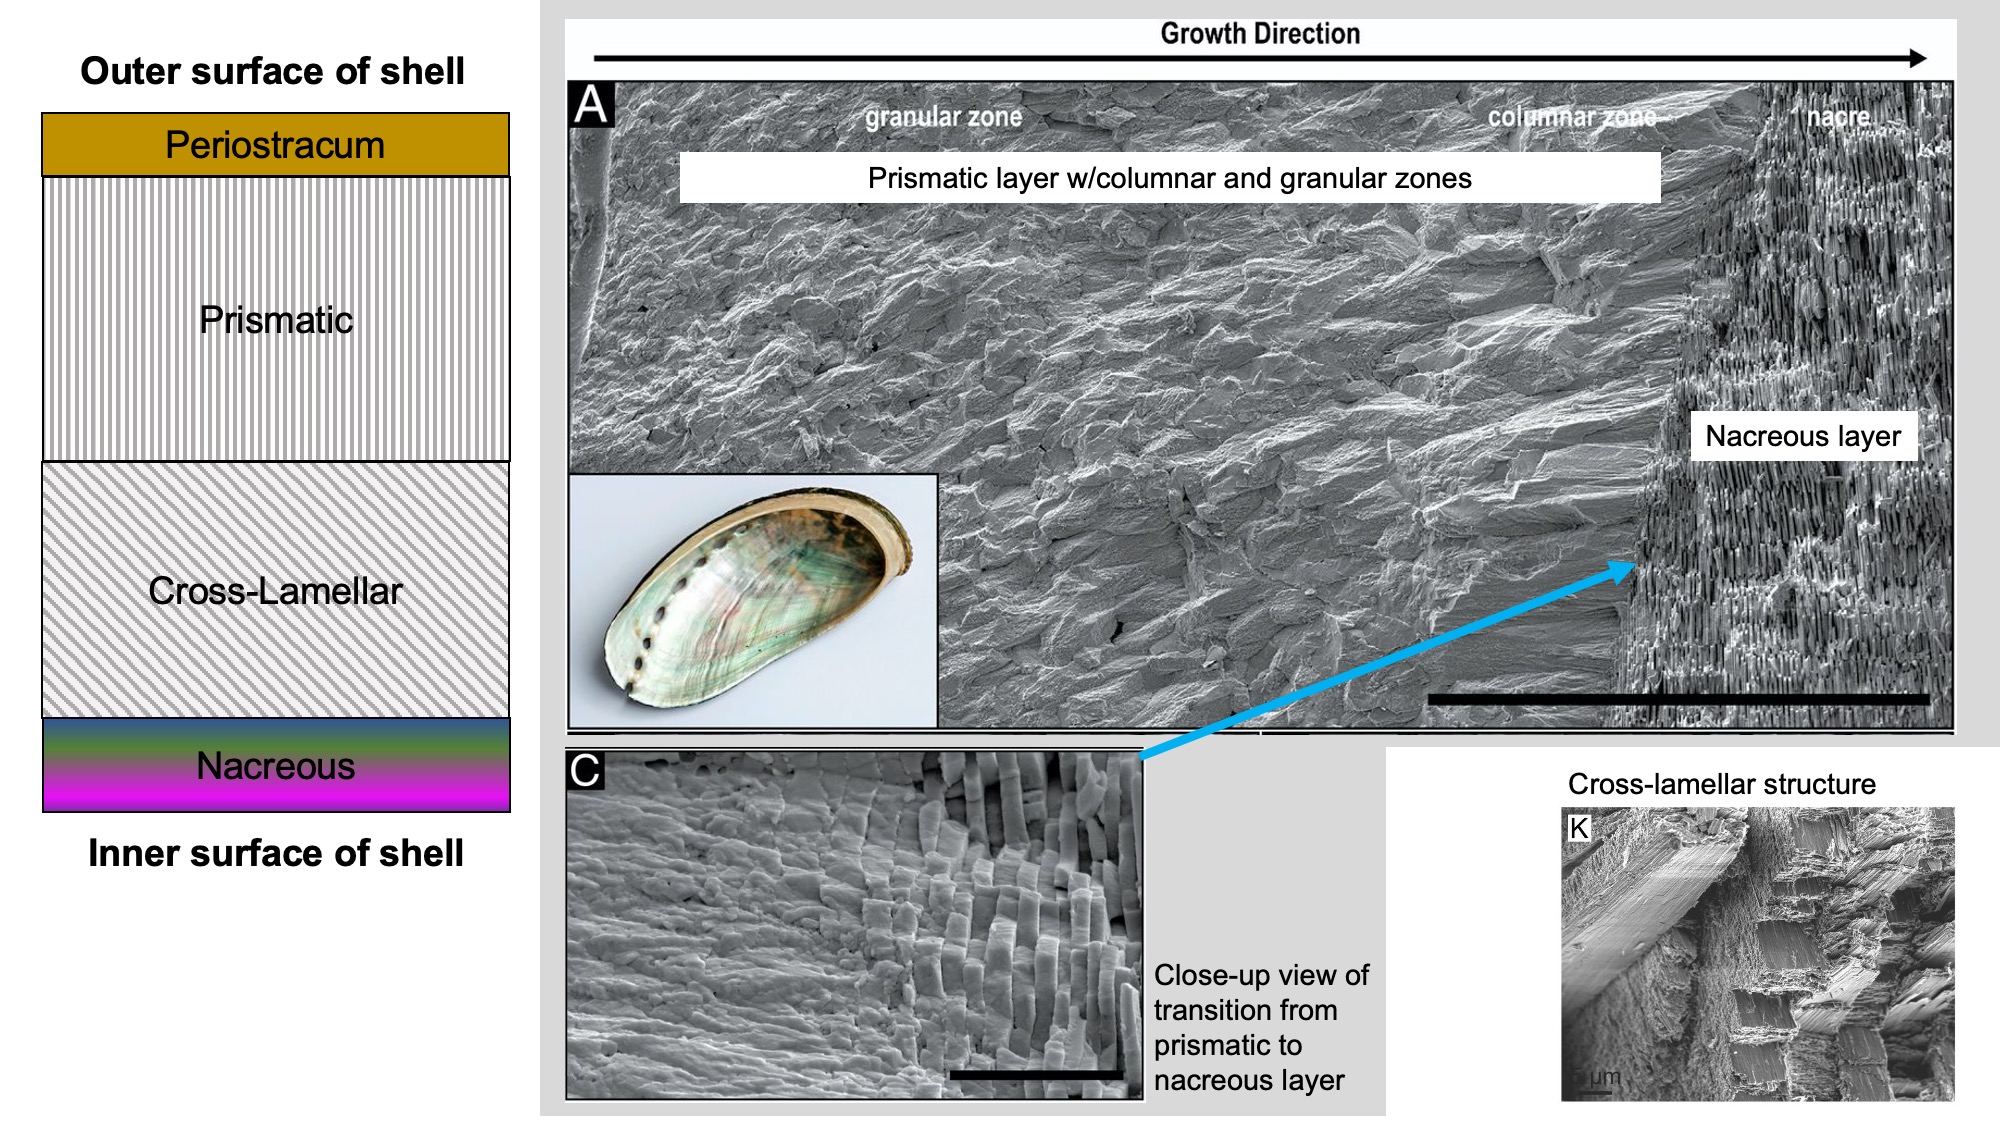 Image shows the different types of shell microstructure in gastropod shells.